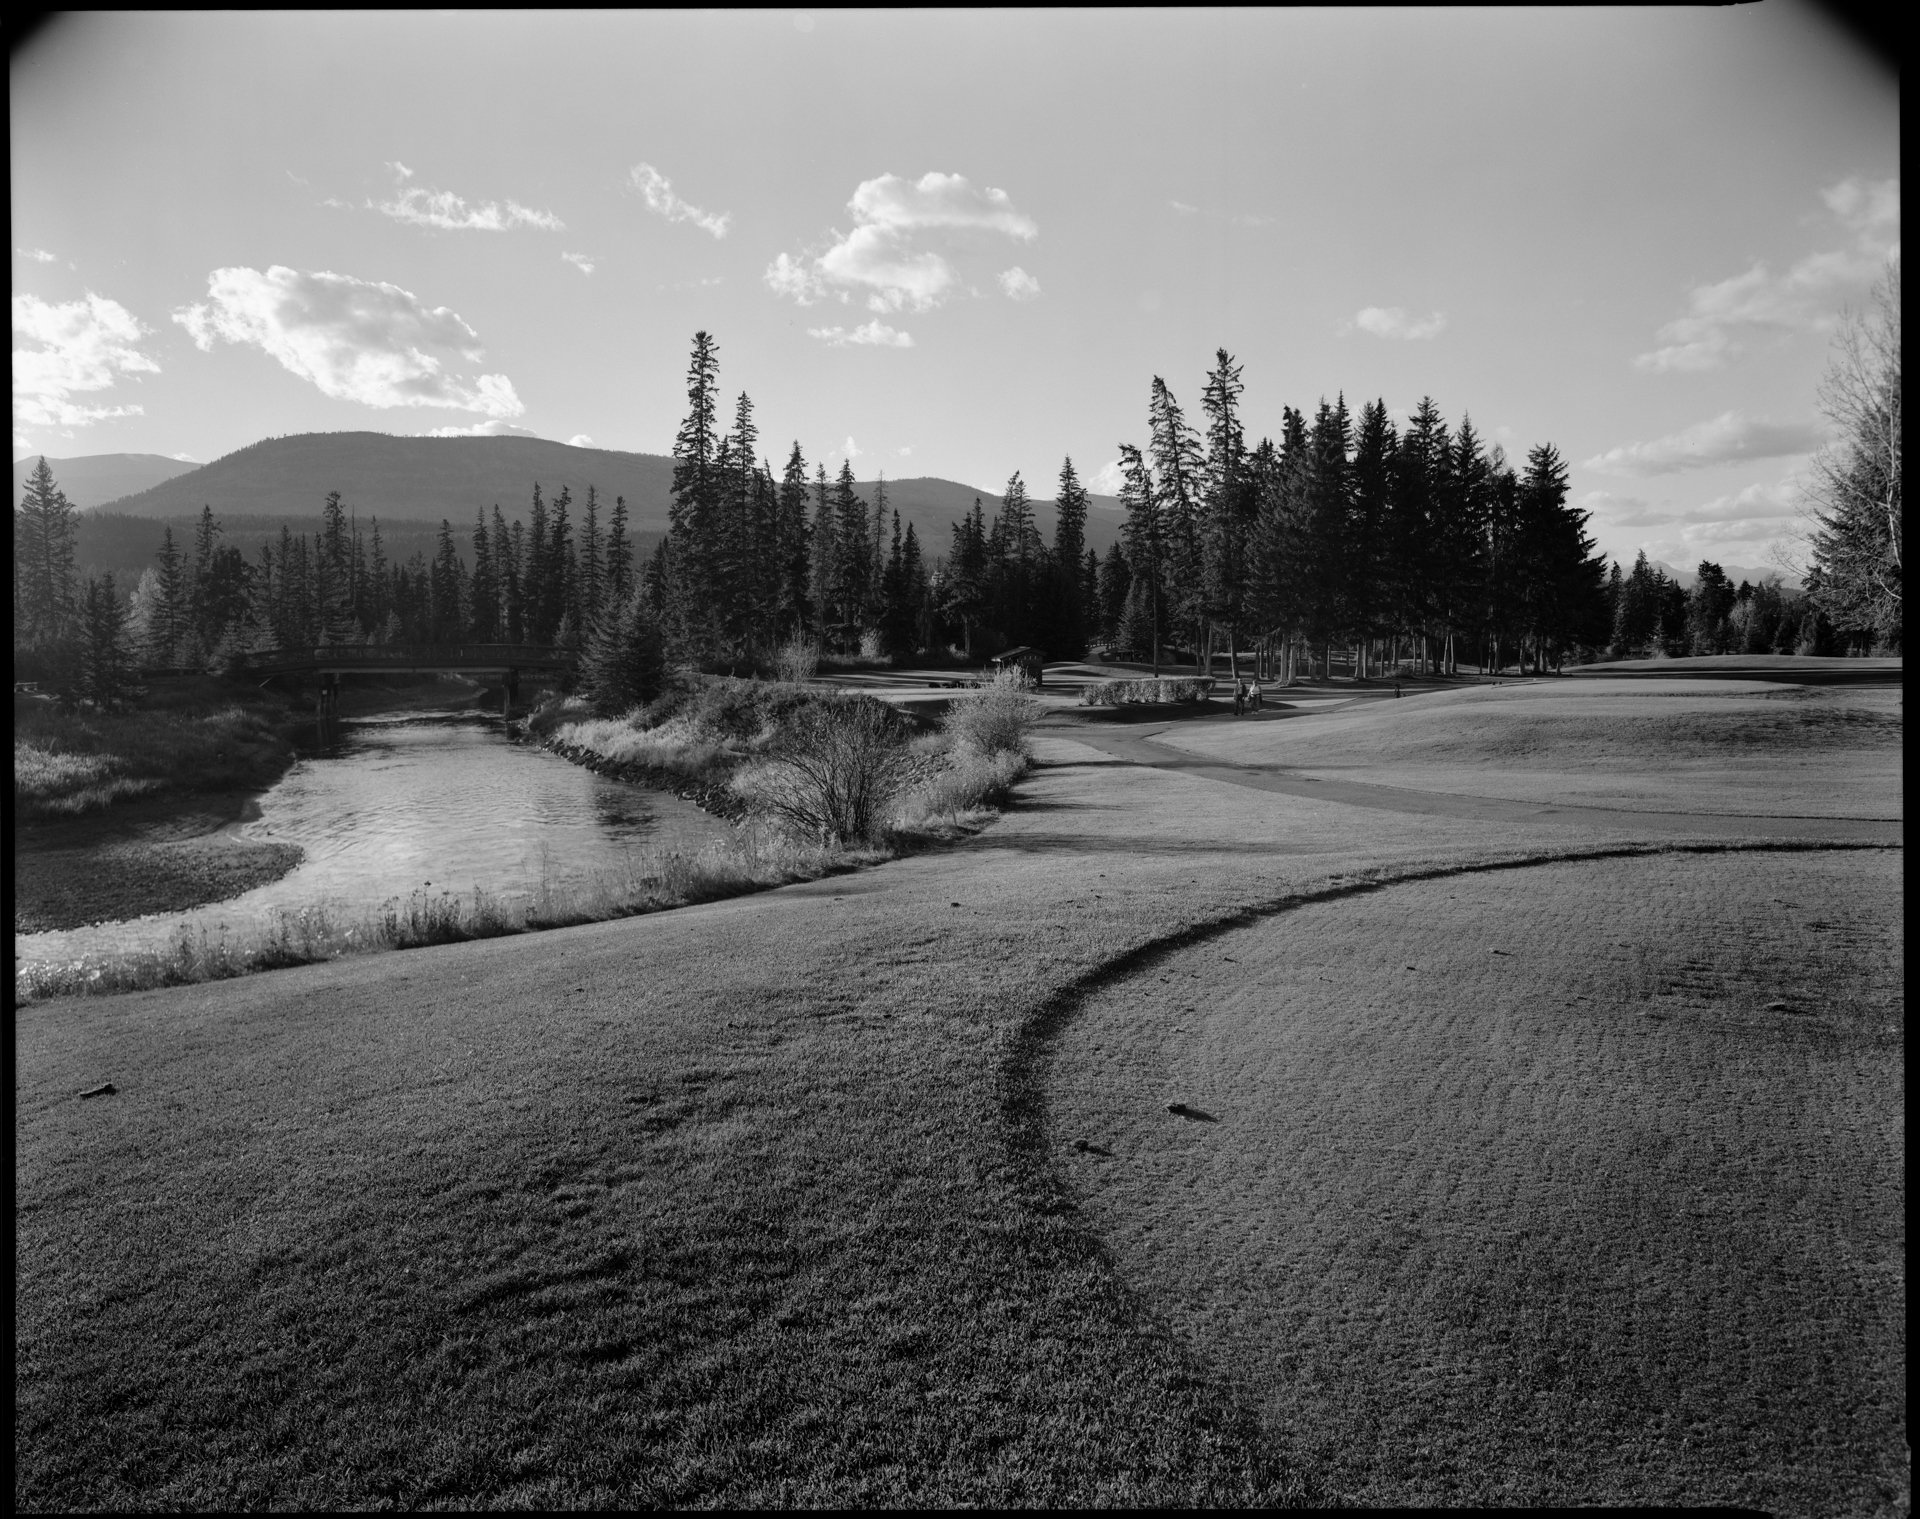  Robbie McClaran “View from the number 13 tee at Riverside Golf Course, Fairmont Hot Springs, British Columbia, approximately 1.5 miles downstream from Columbia Lake.” 